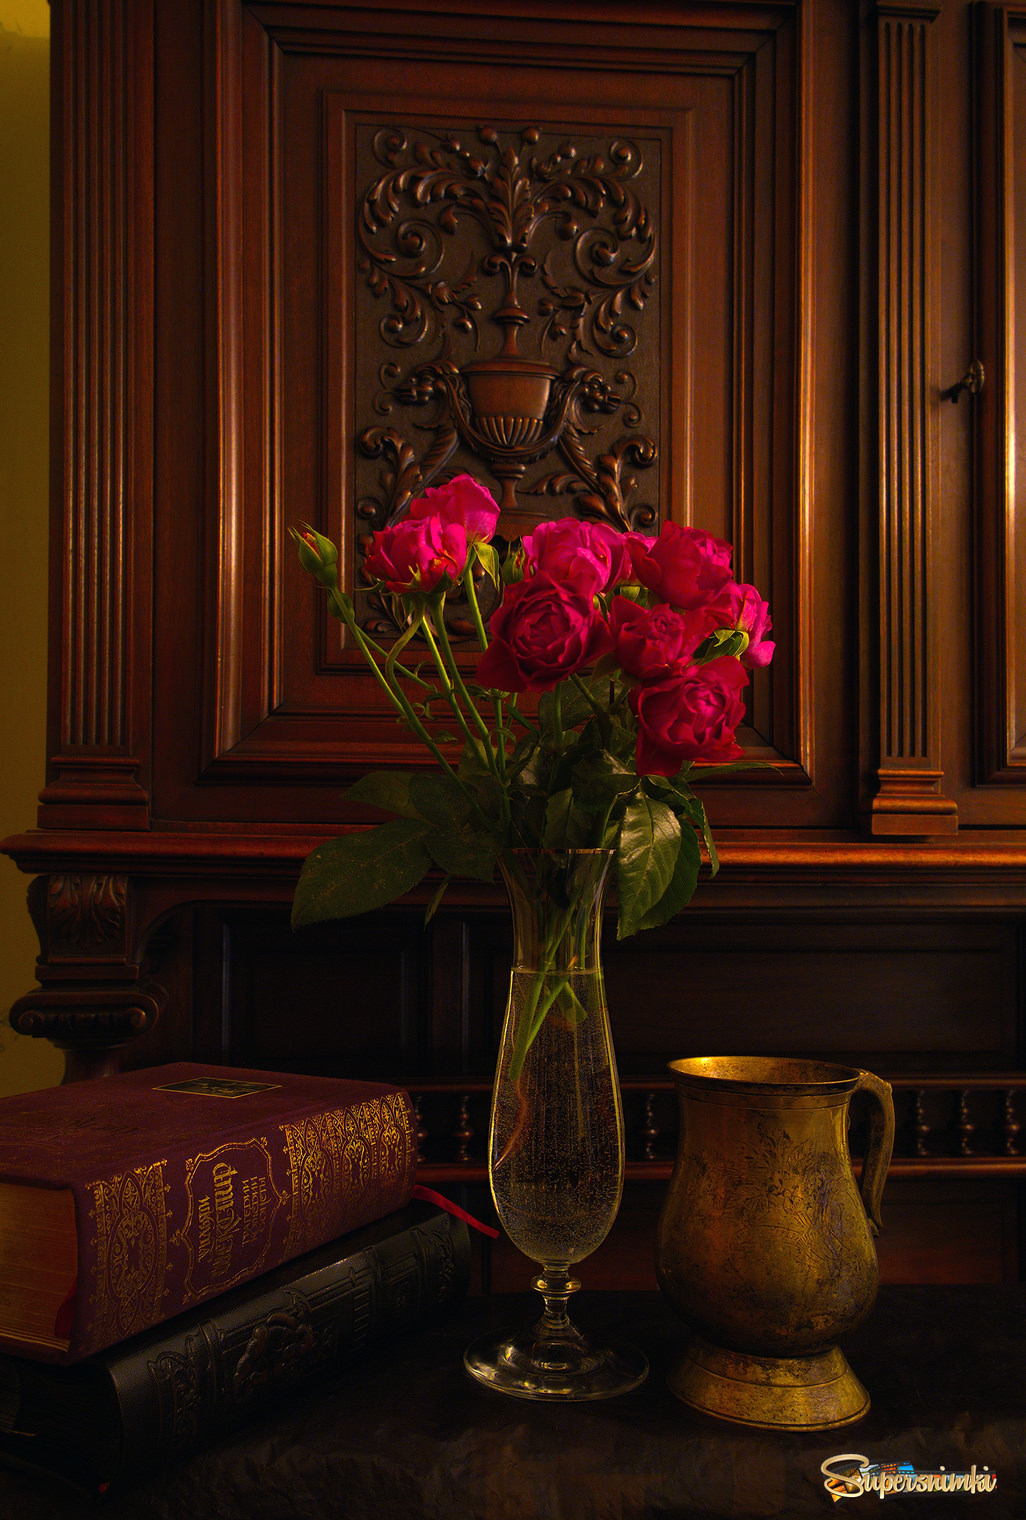 With roses, books, and antique bowl